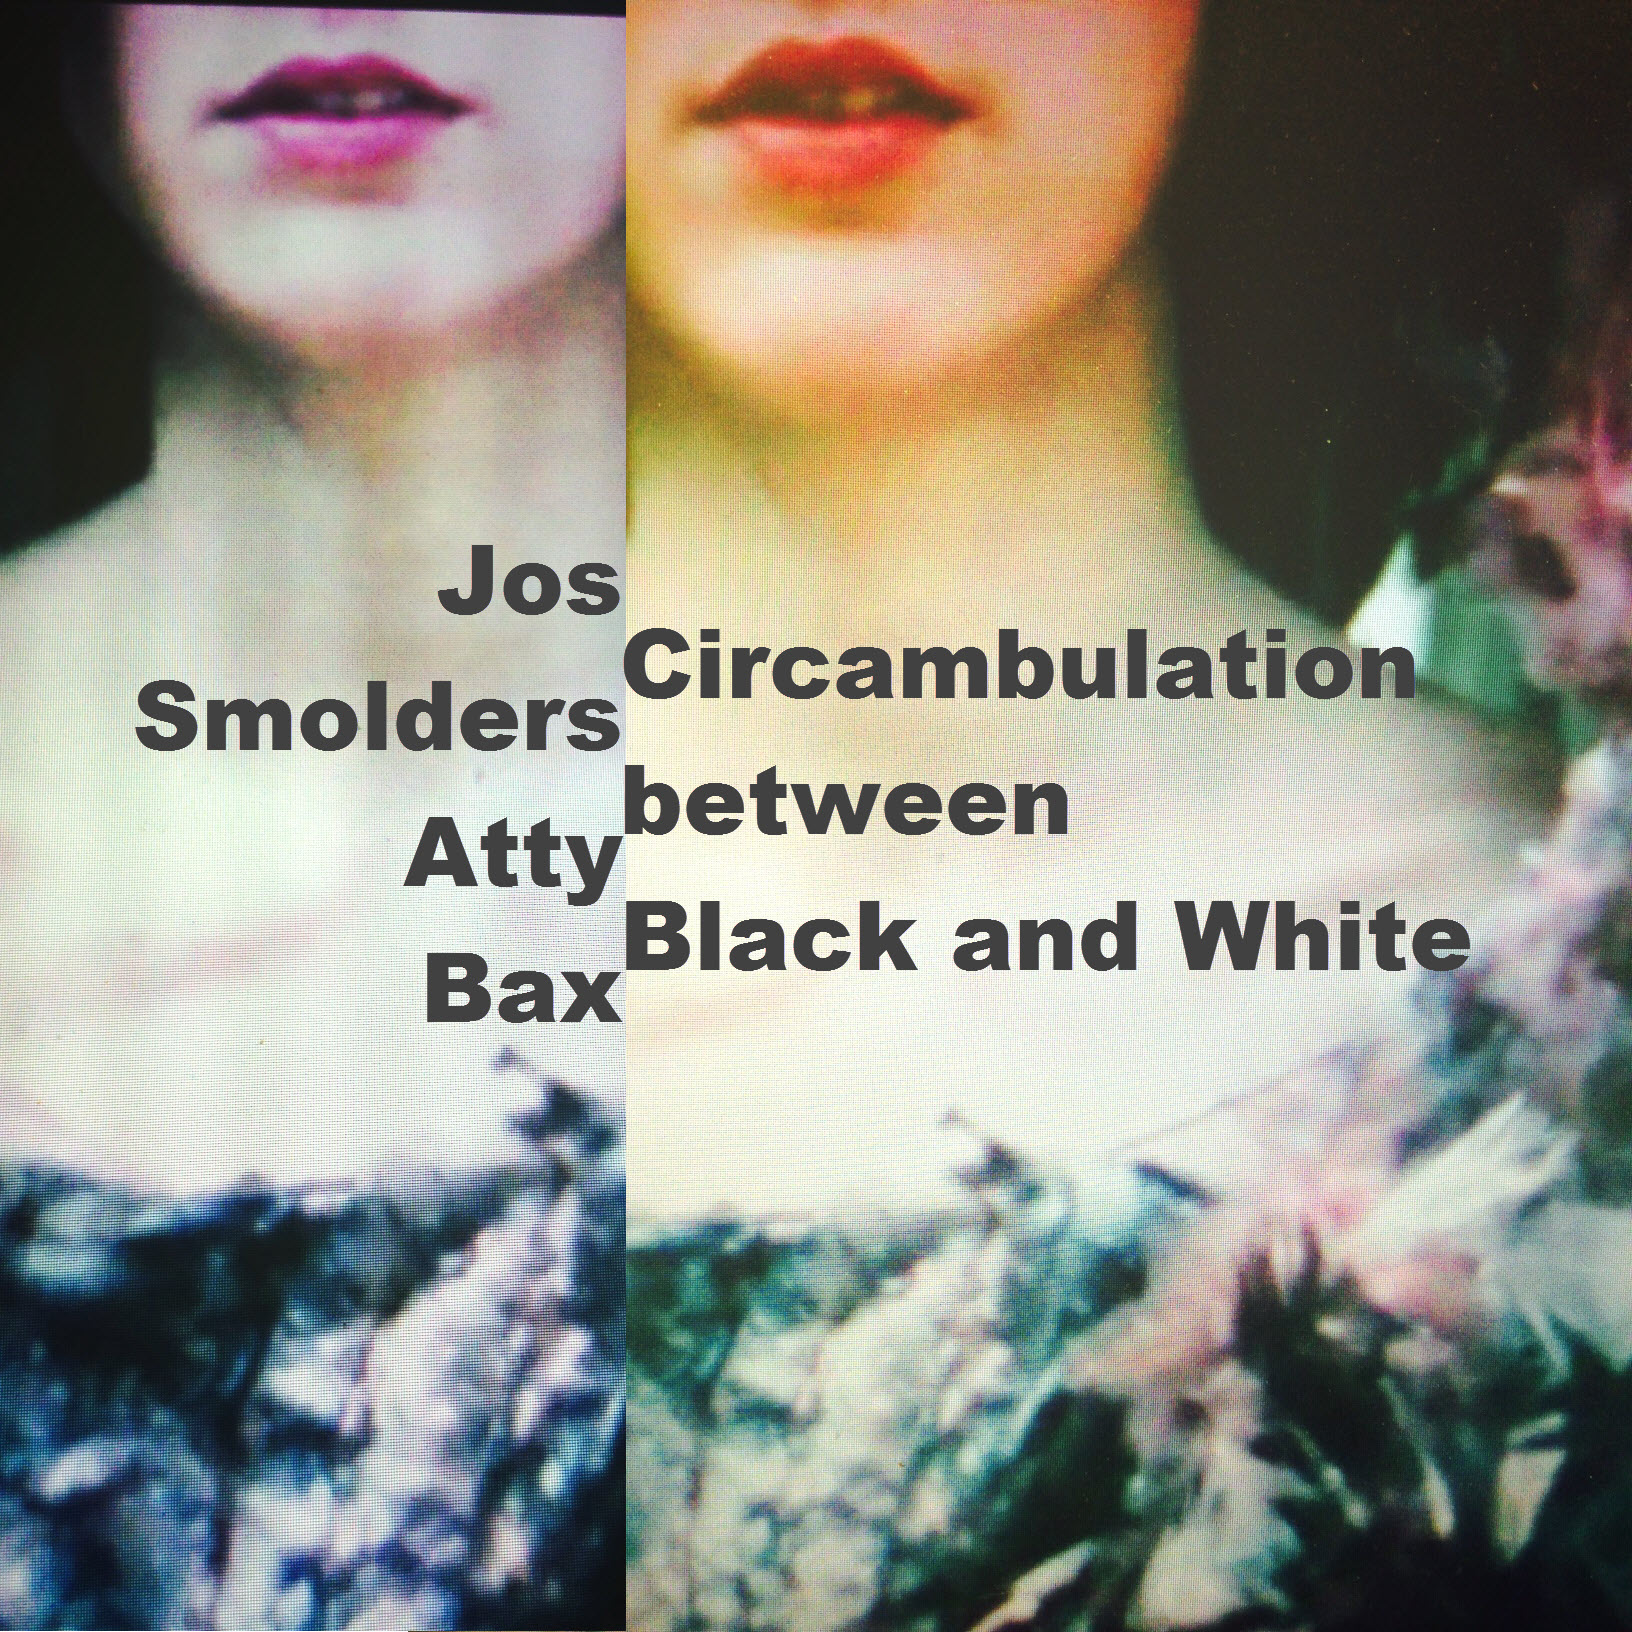 Circambulation between Black and White